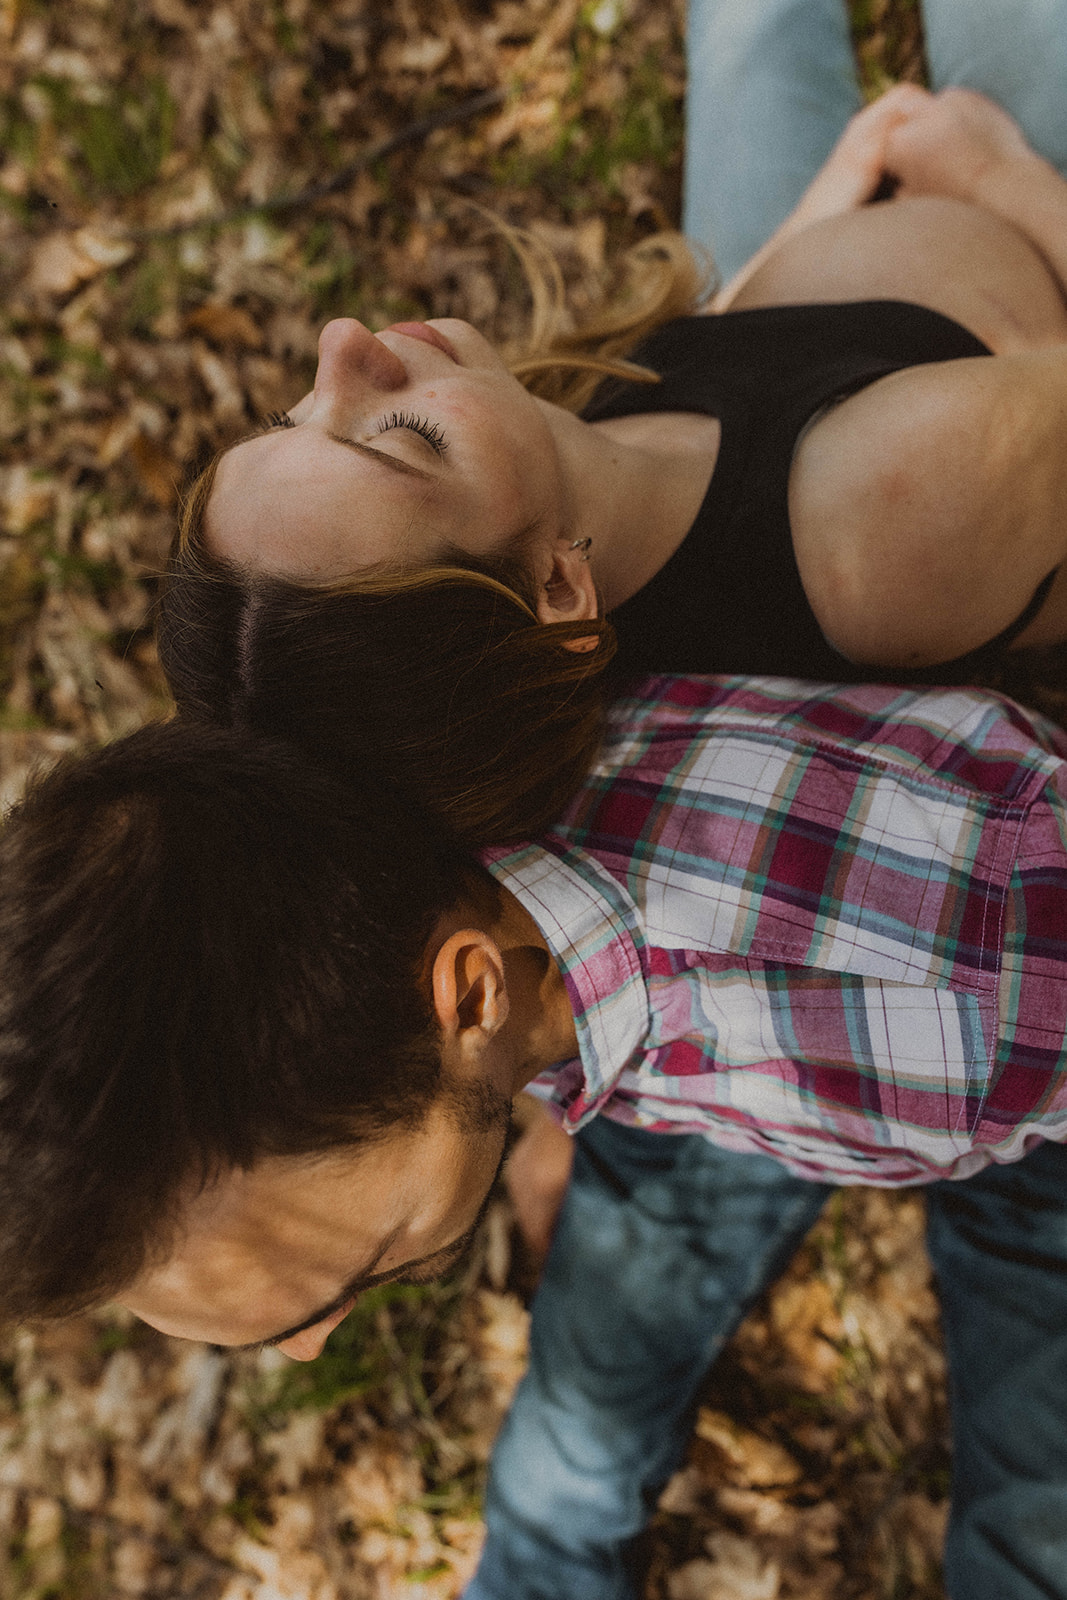 Future parents pose intimately together during their dreamy upstate New York maternity photos 